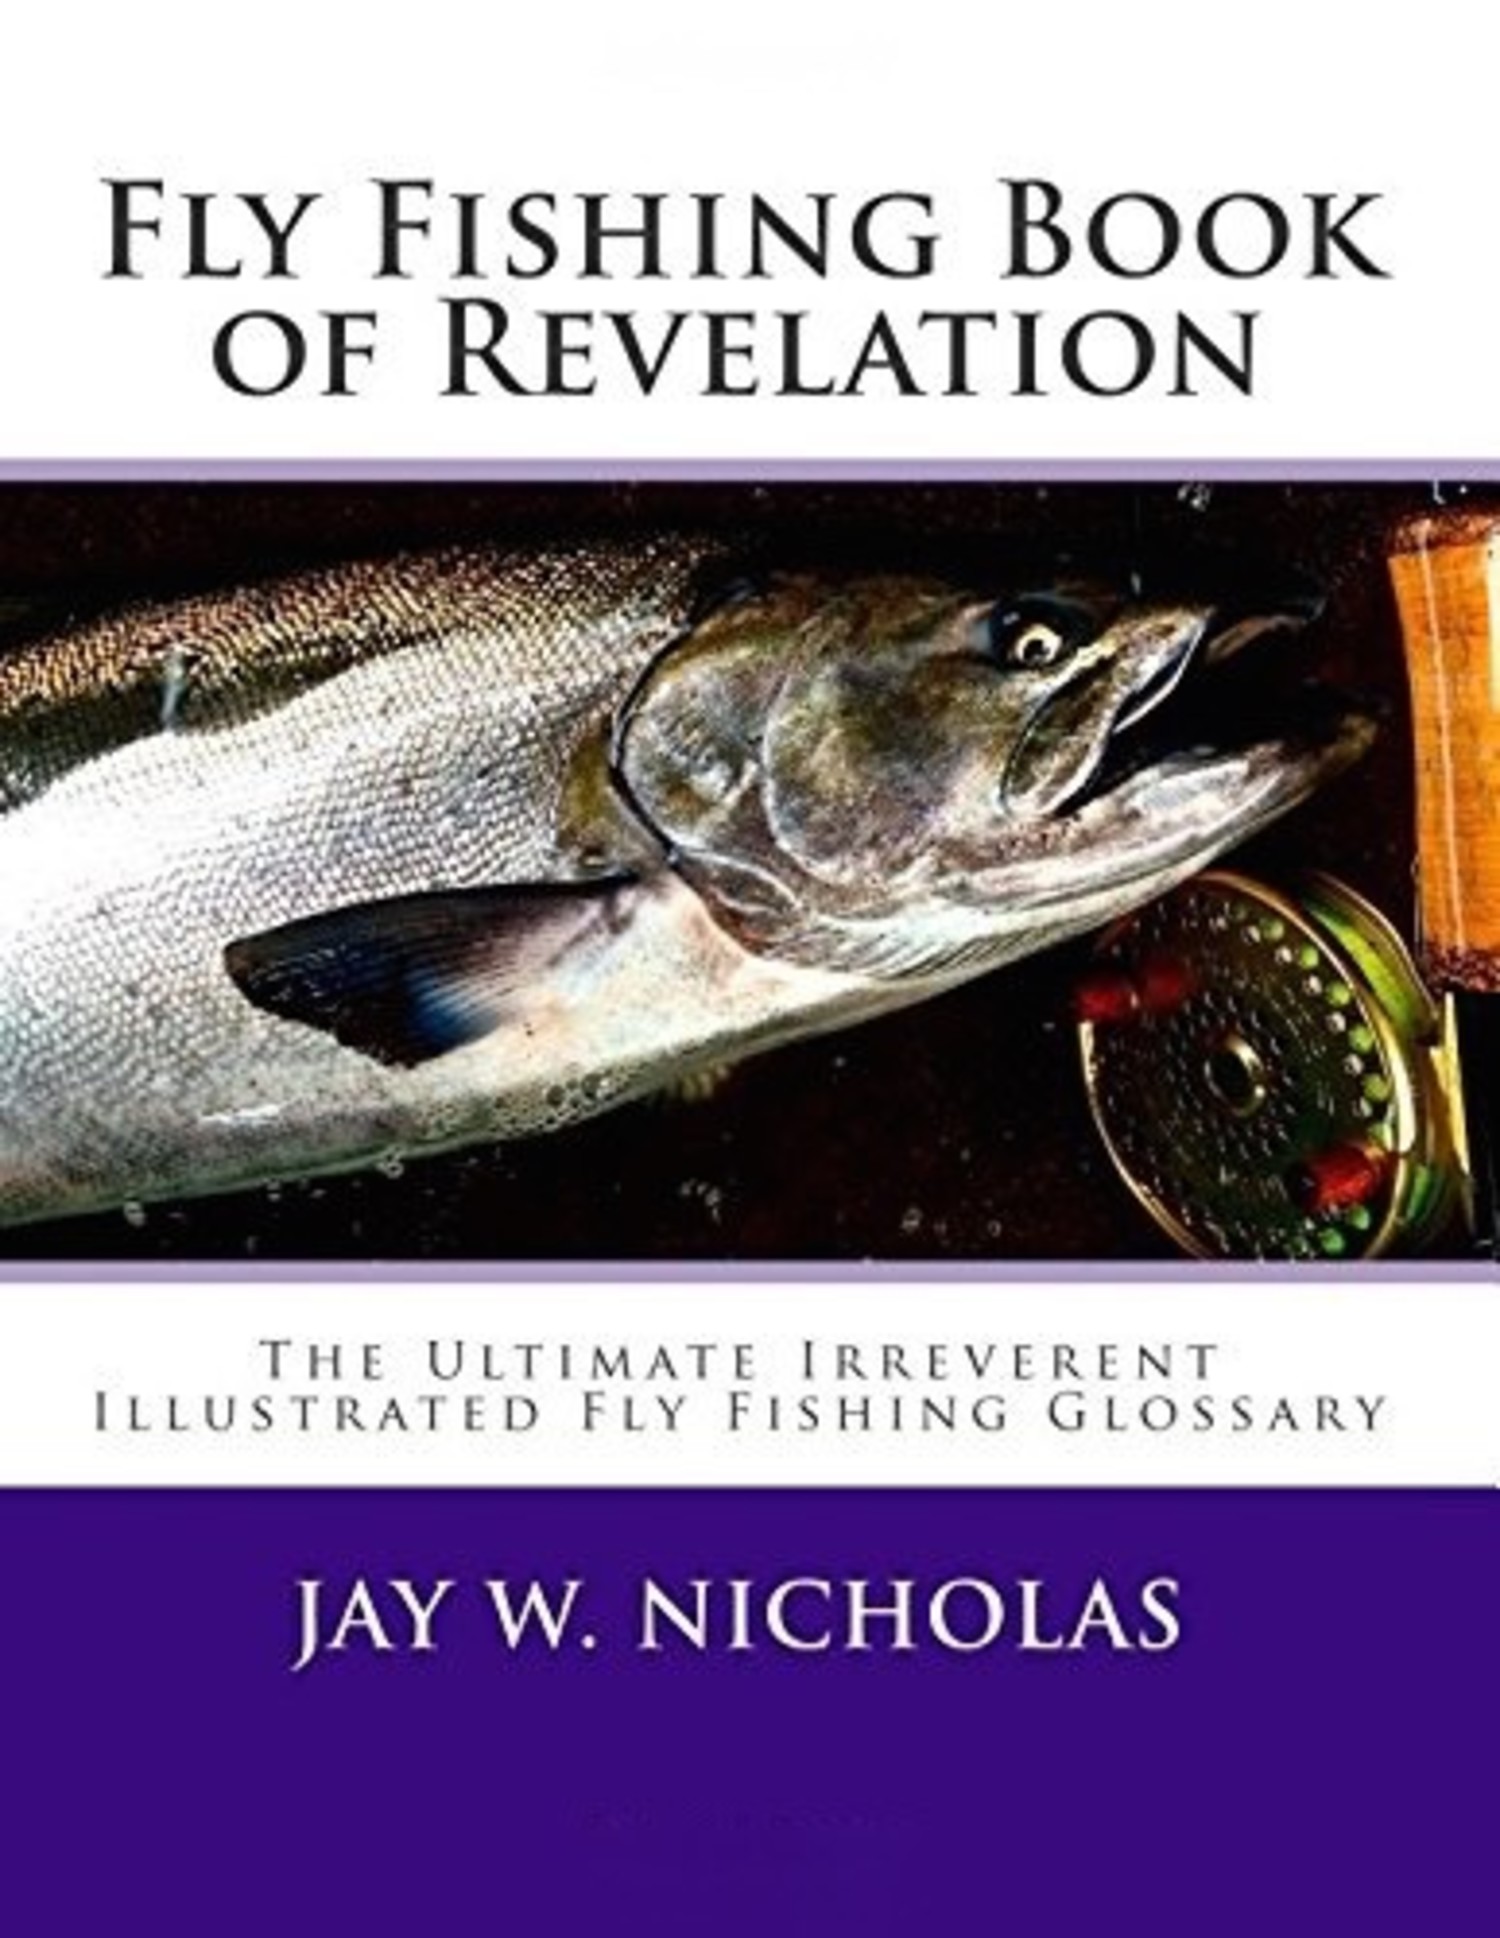 Jay Nicholas Fly Fishing Book of Revelation, By Jay Nicholas - Royal  Treatment Fly Fishing